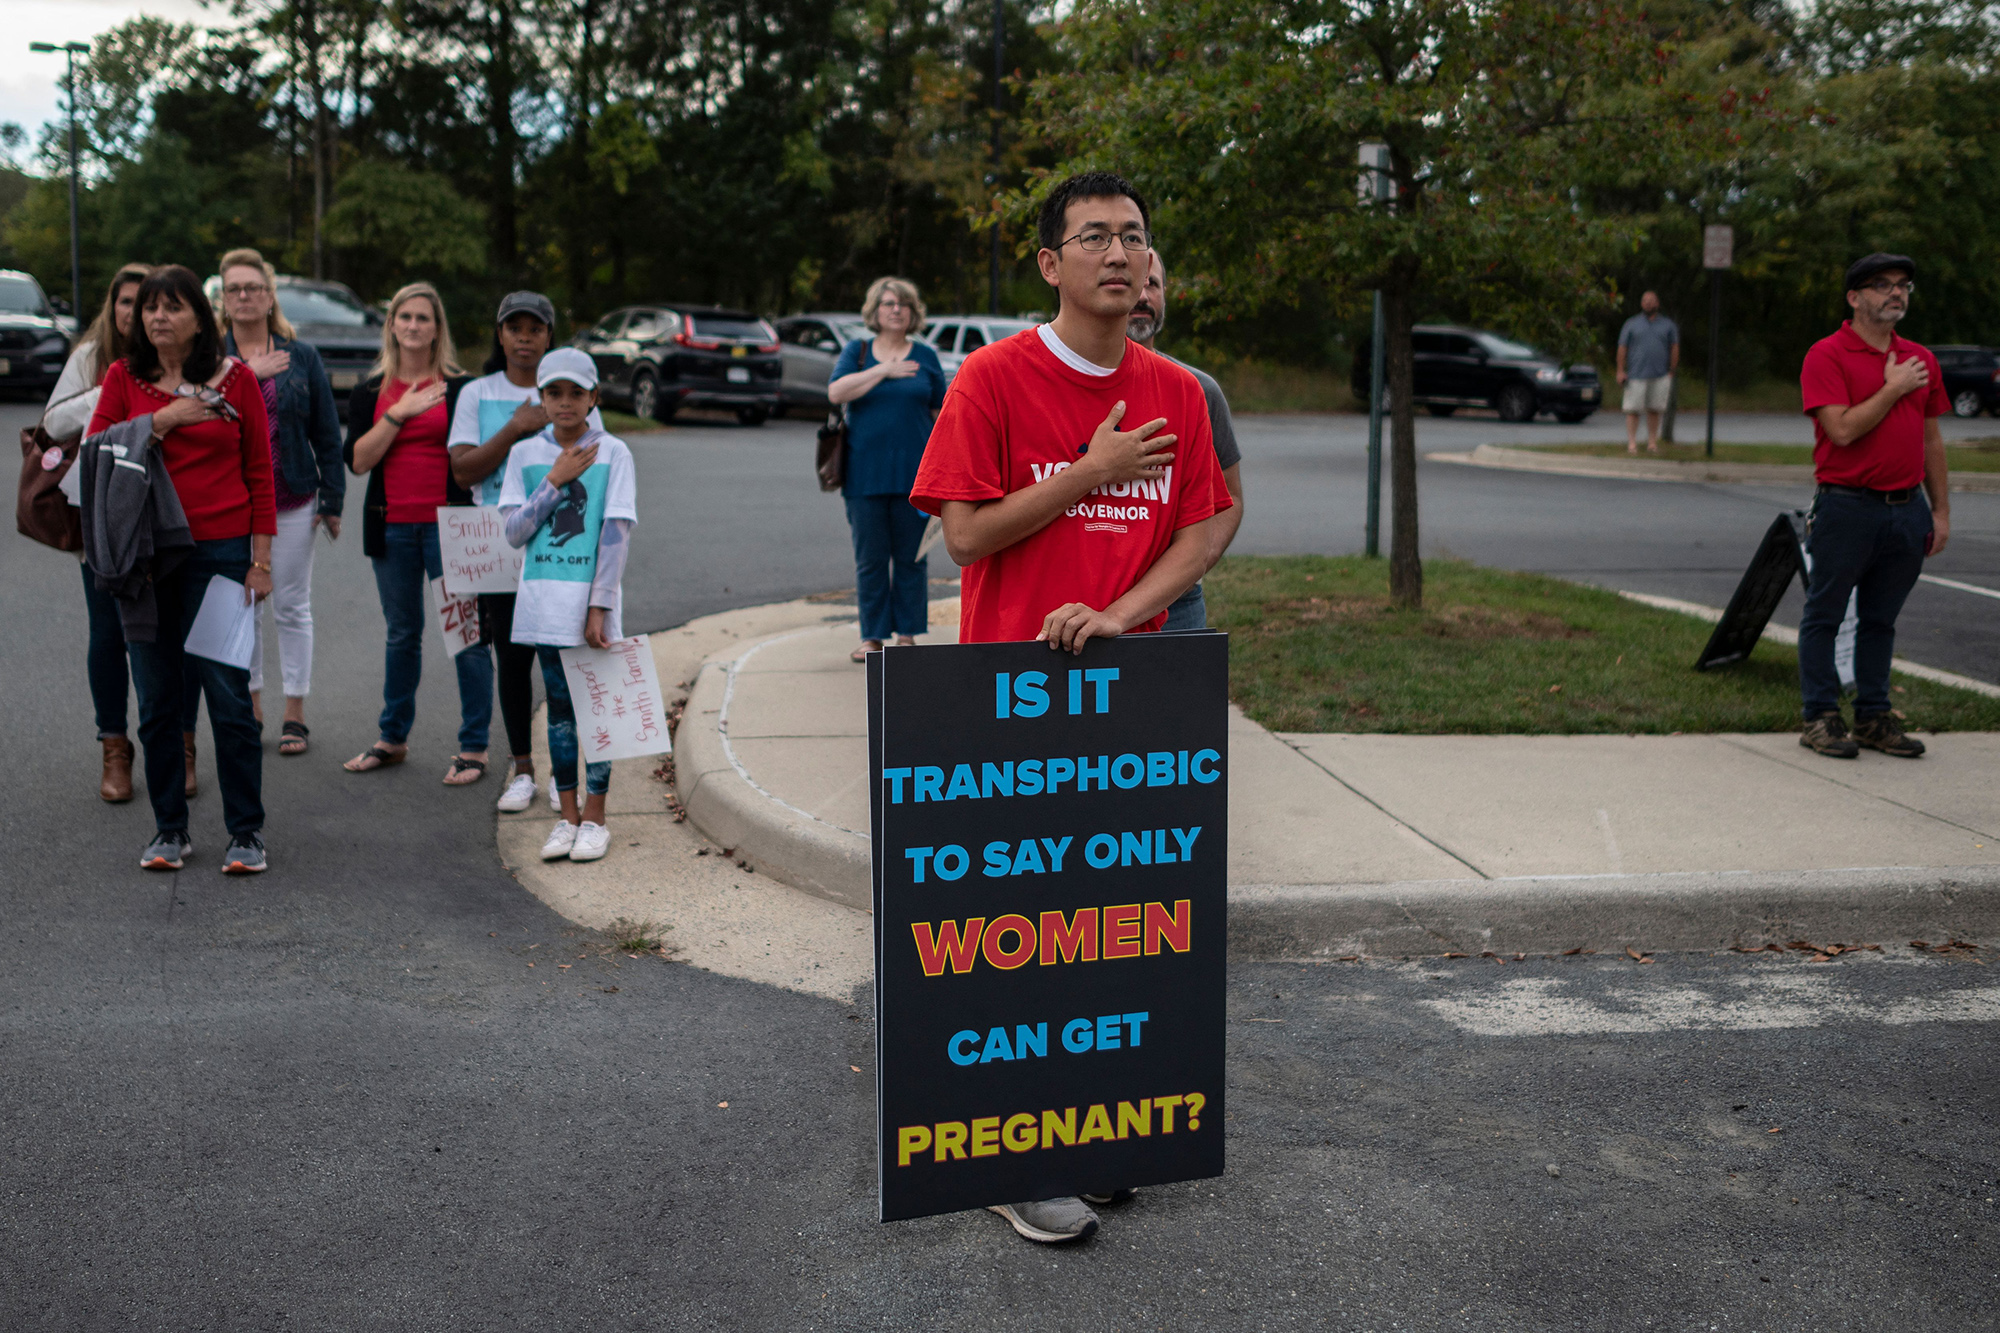 Protesters and activists stand at attention as the national anthem is sung to open a Loudoun County Public Schools (LCPS) board meeting in Ashburn, Virginia on October 12, 2021.